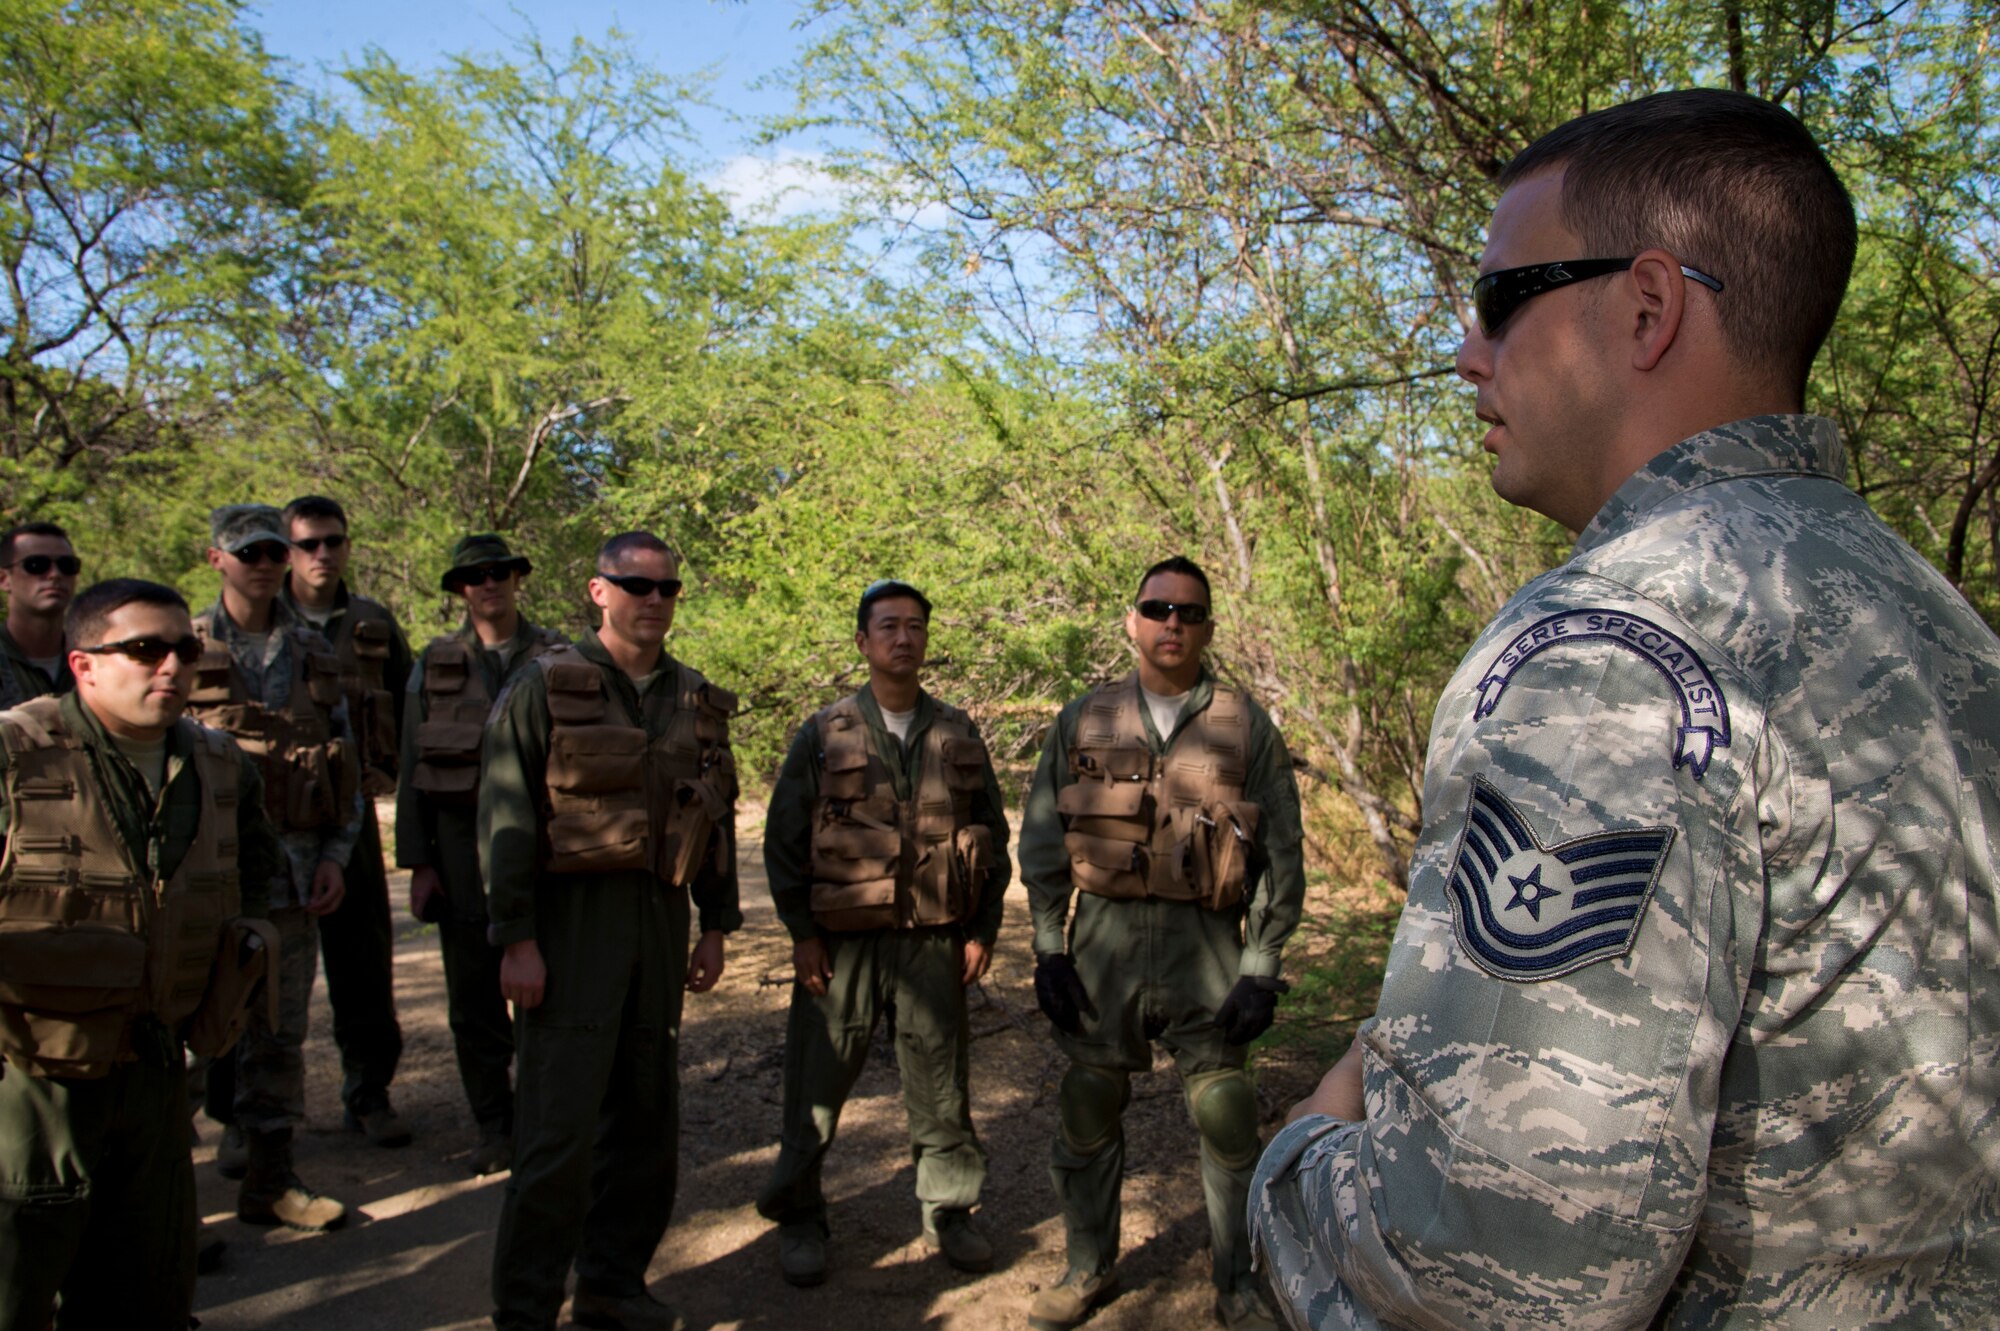 Tech. Sgt. Jeffrey Ray, a Survival Evade Resist and Escape specialist for the 15th Operational Support Squadron, gives a safety briefing to Airmen from the 15th Wing during SERE combat survival training on Joint Base Pearl Harbor-Hickam, Hawaii, March 26, 2015. During the training Airmen are required to demonstrate their ability to conceal their location, evade opposition forces, and practice proper recovery procedures. (U.S. Air Force photo by Tech. Sgt. Aaron Oelrich/Released) 